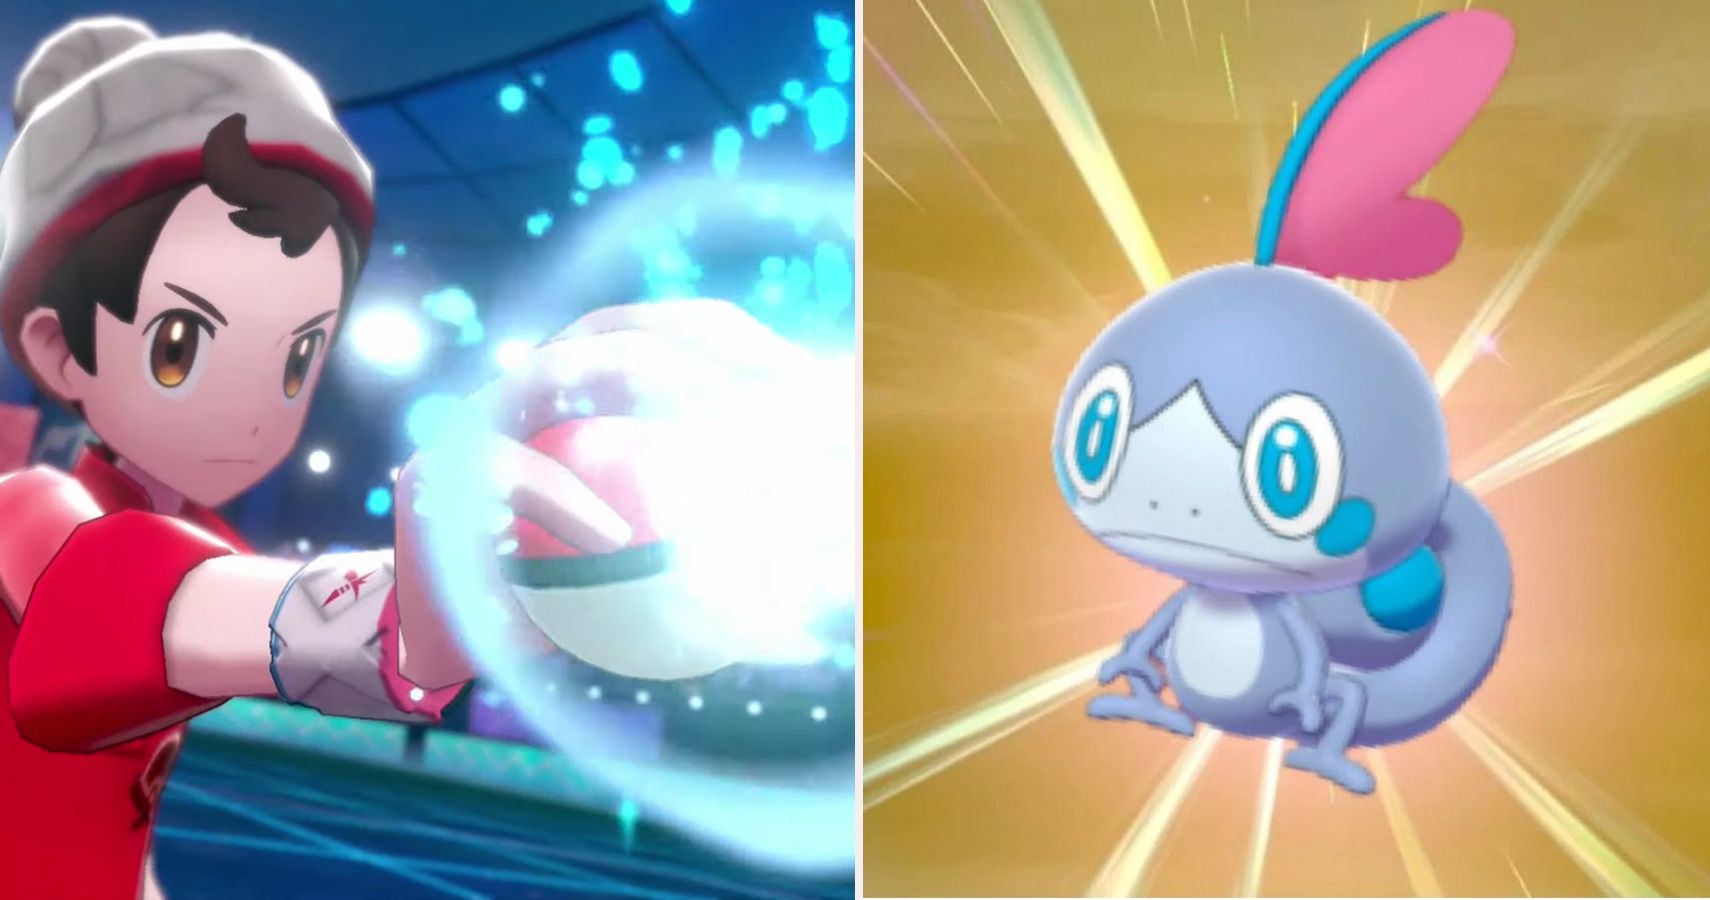 Shiny hunting in Pokemon Sword and Shield: How to increase your